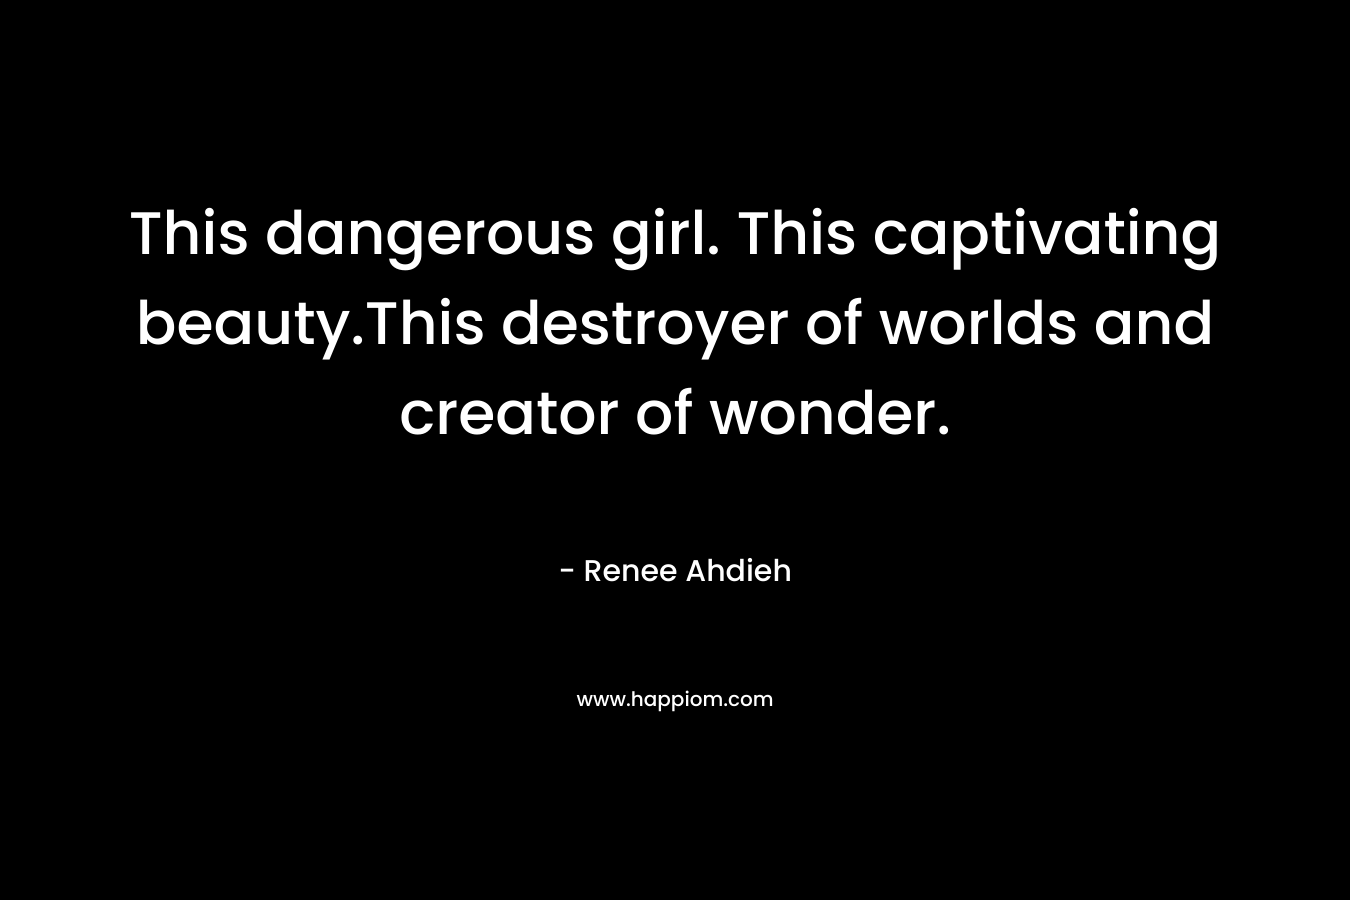 This dangerous girl. This captivating beauty.This destroyer of worlds and creator of wonder. – Renee Ahdieh